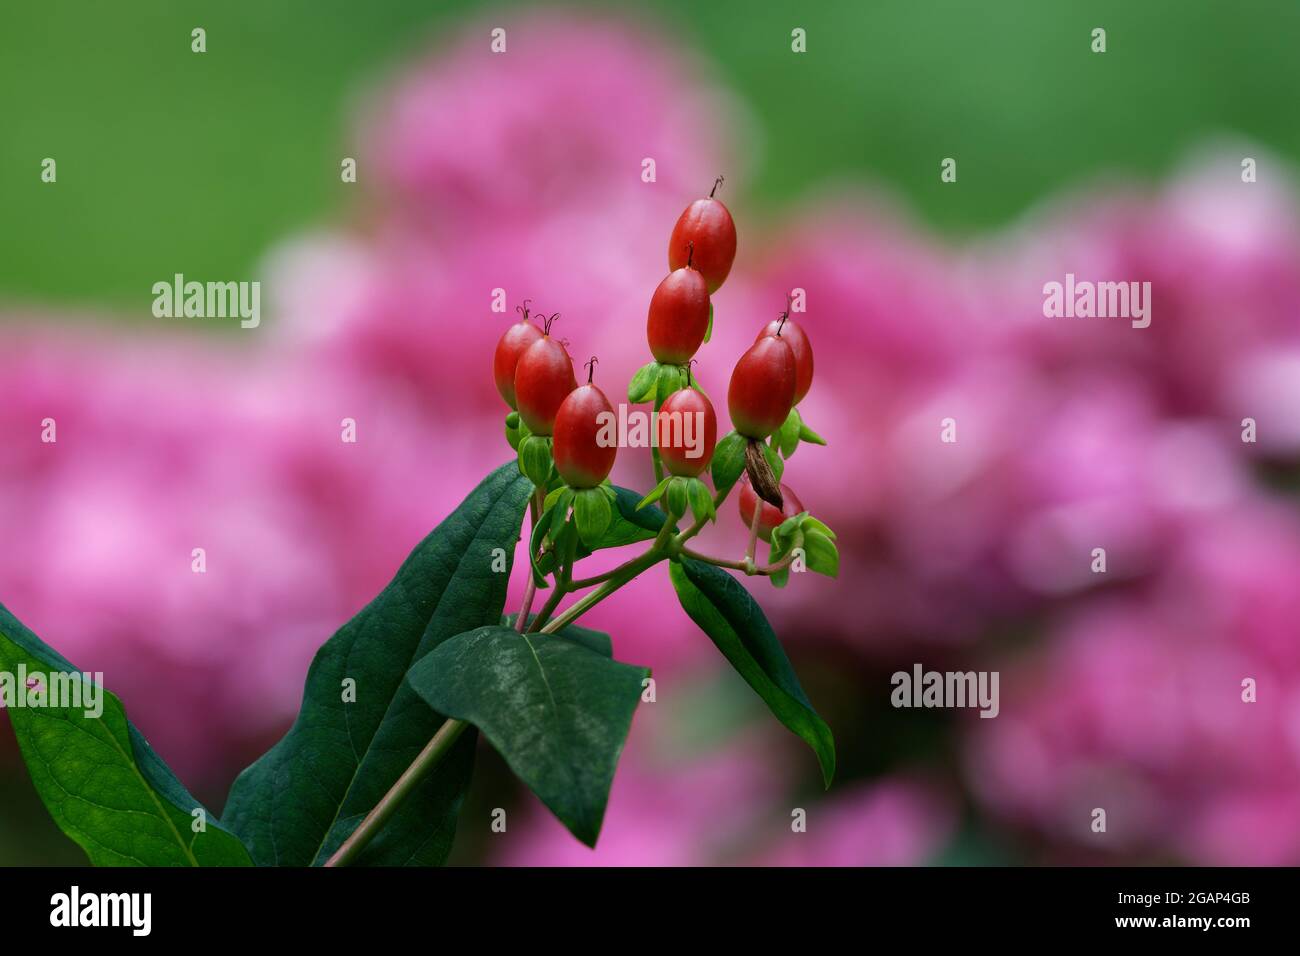 Hypericum androsaemum, red fruits of Tutsan against blurred pink green background Stock Photo